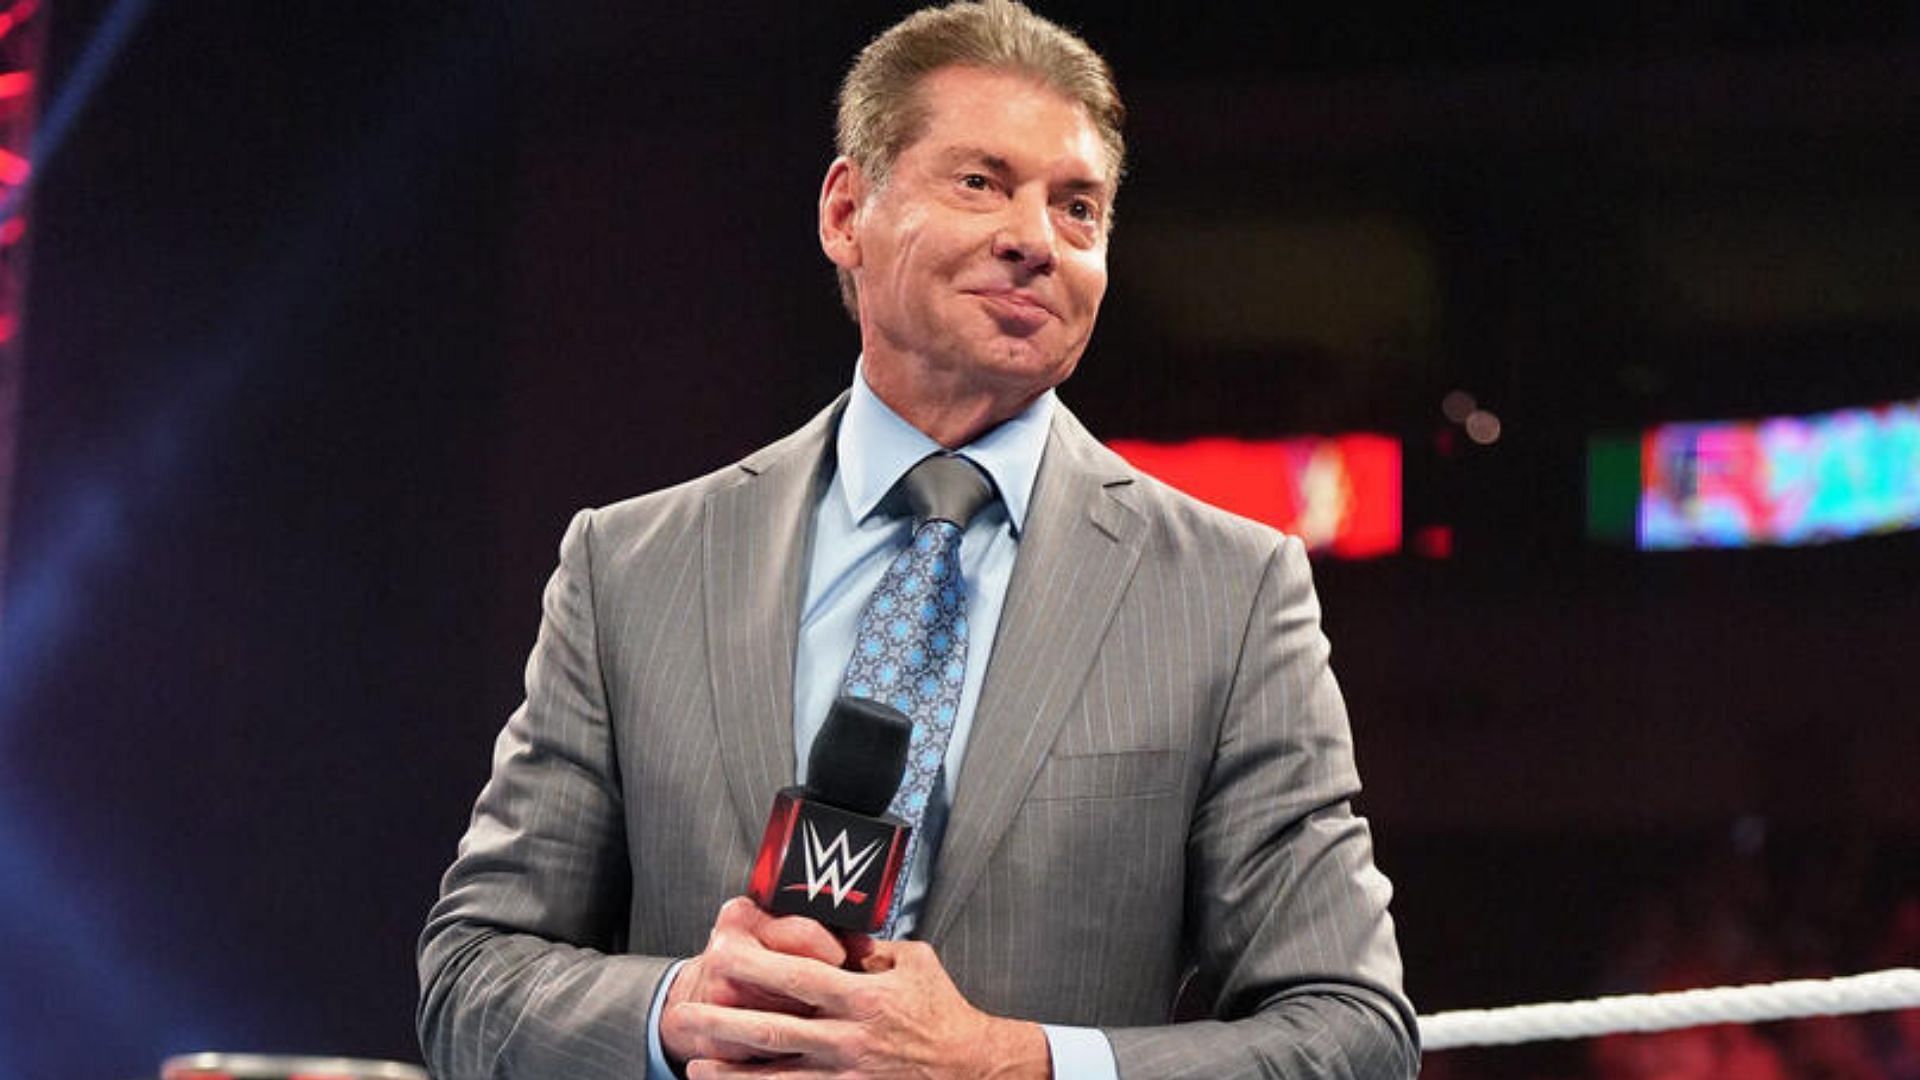 Mr. McMahon resigned from the company last month.